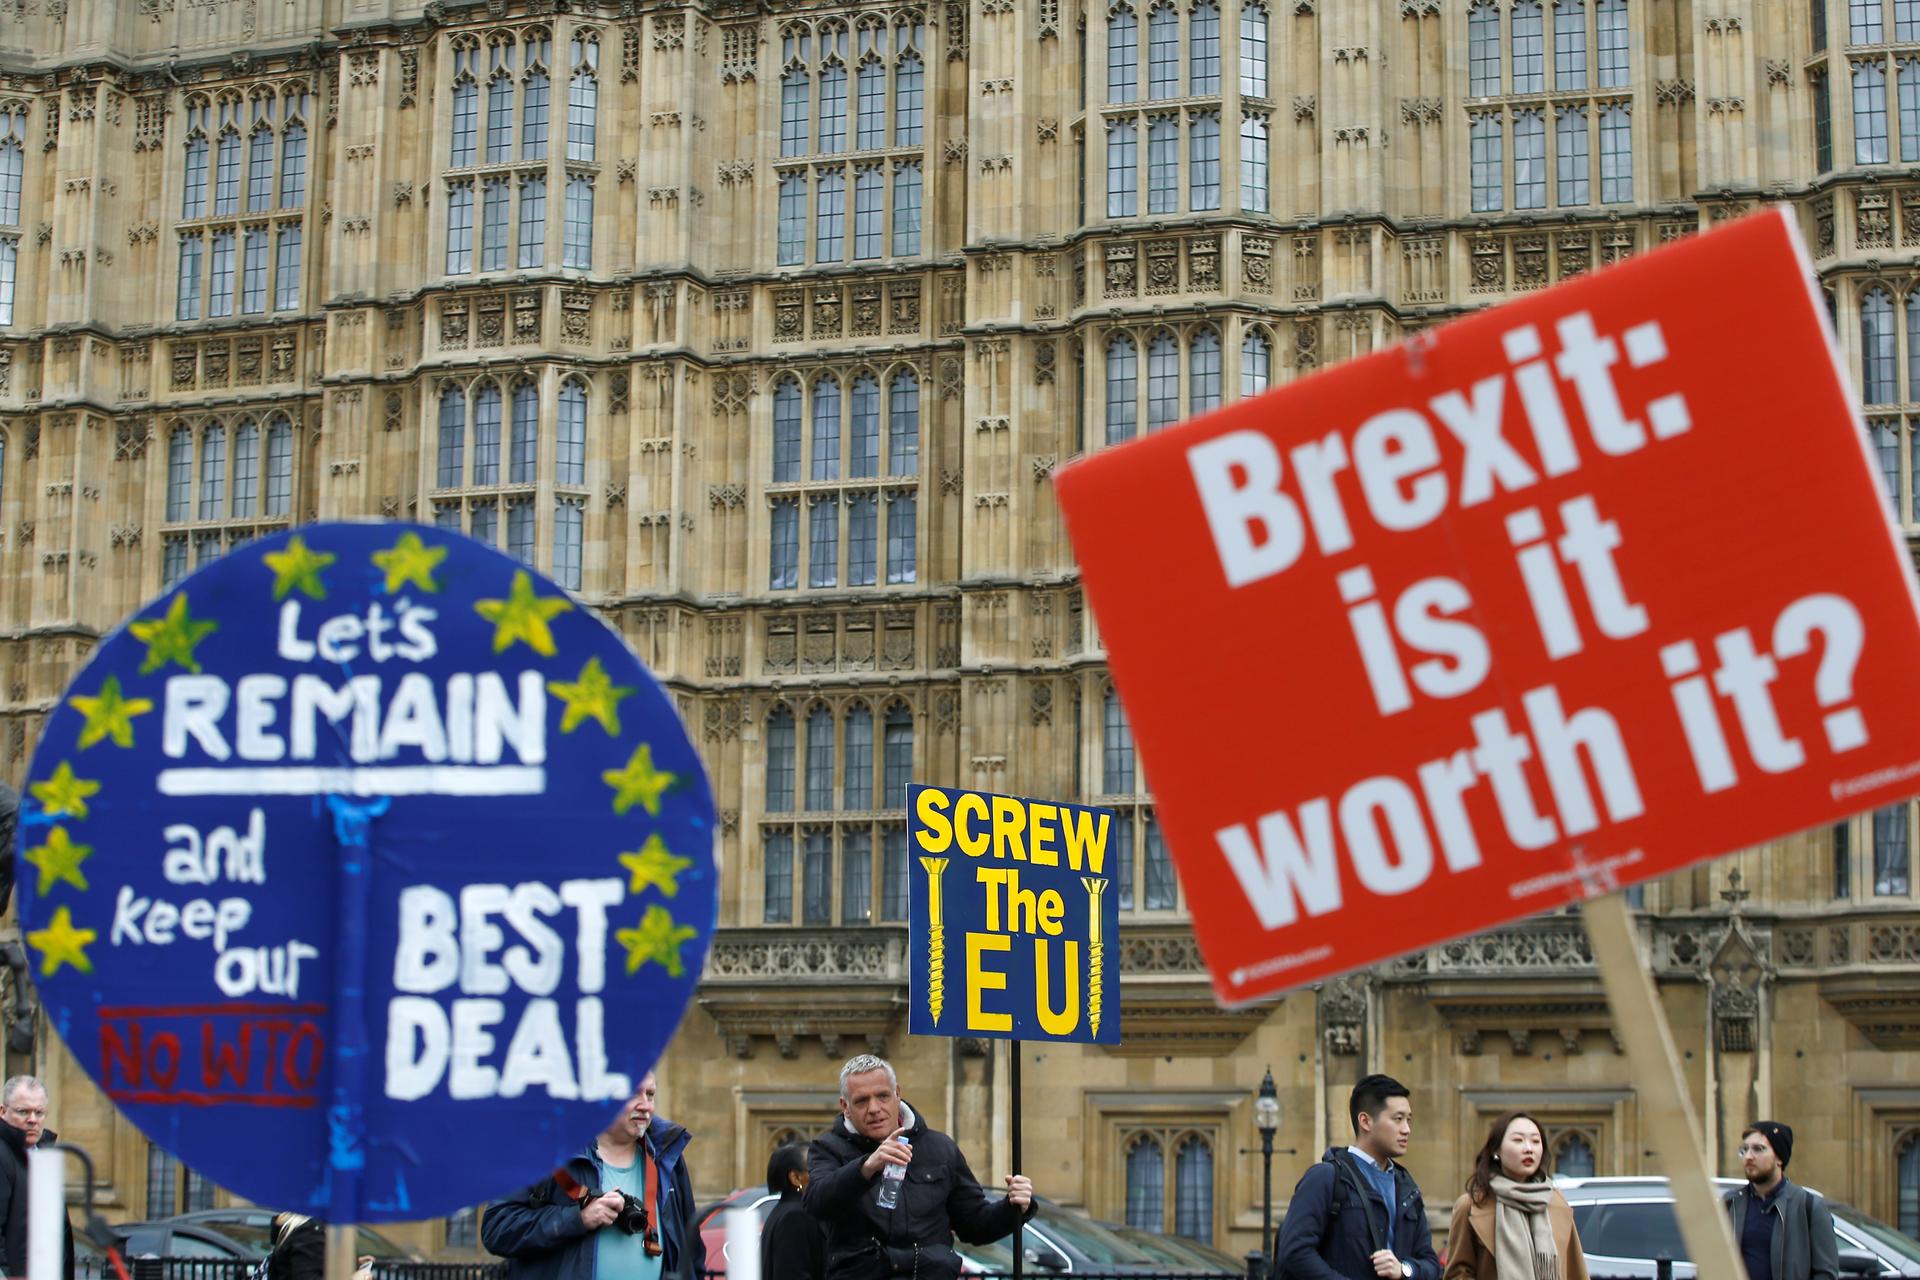 Pro- and anti-Brexit signs